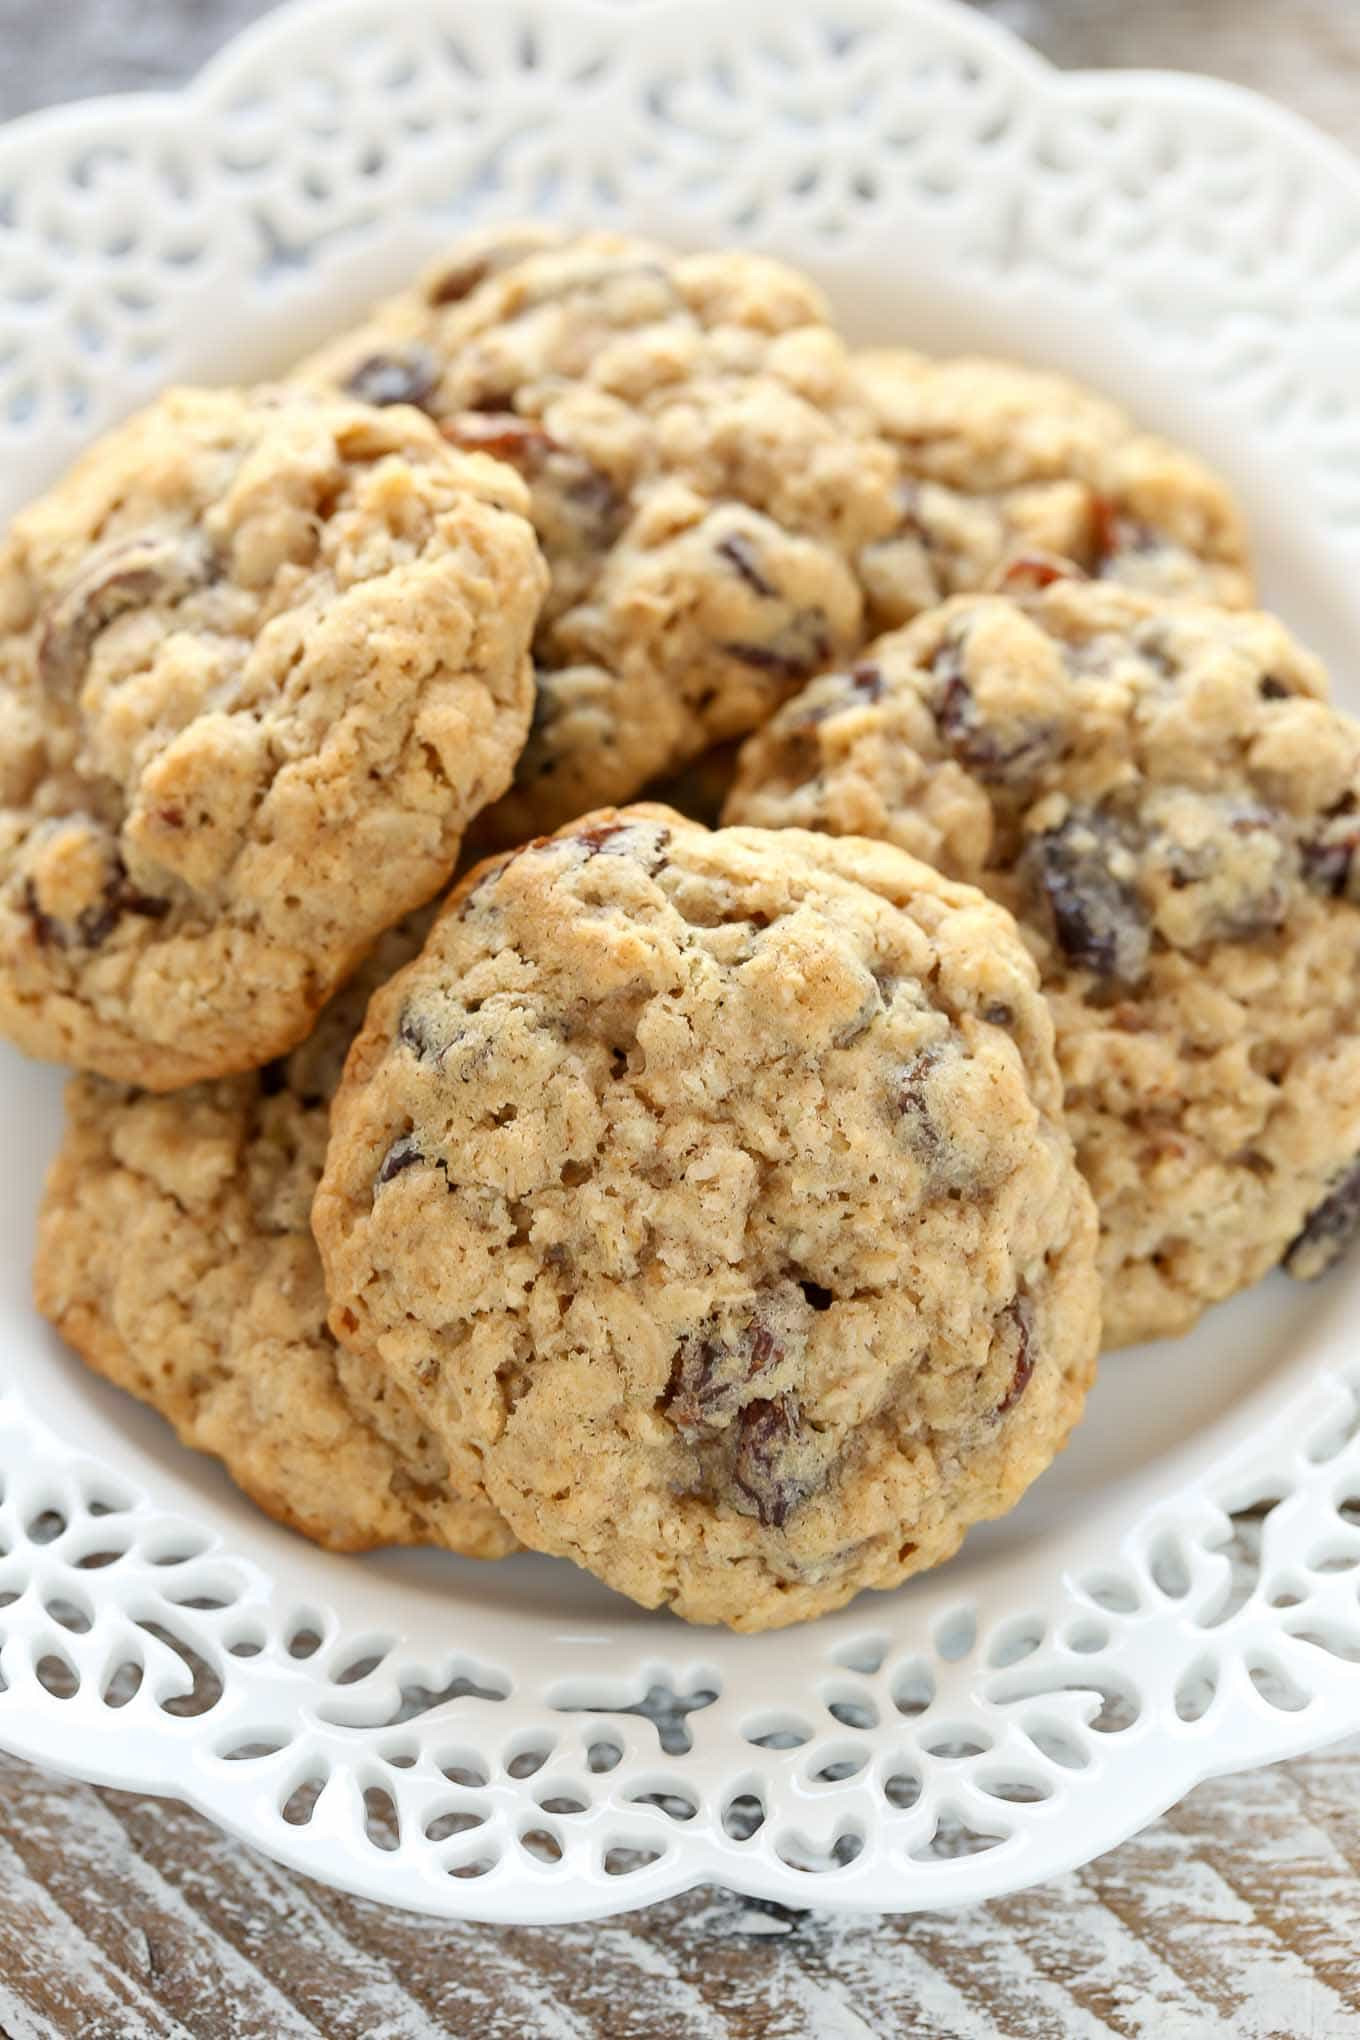 Oatmeal Cookies without Raisins Fresh How to Make Homemade Oatmeal Cookies without Baking soda